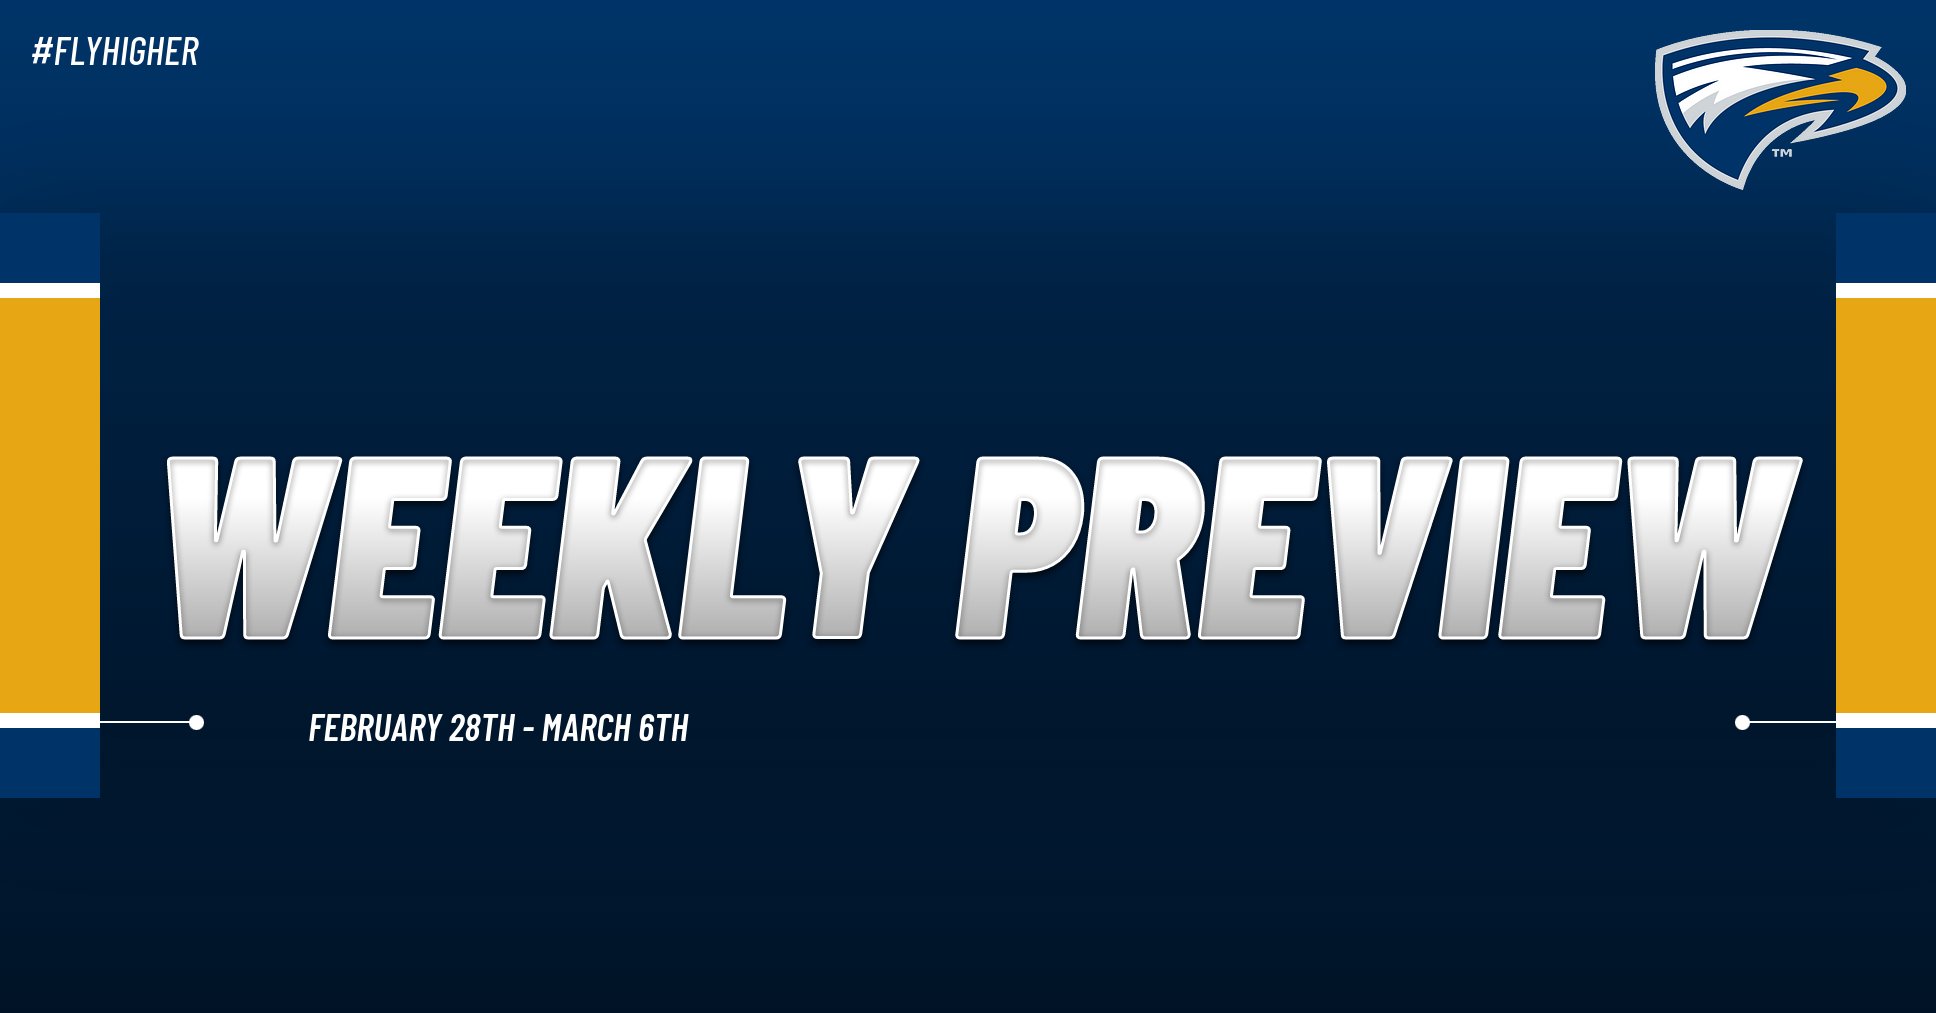 Emory Athletics Weekly Preview: February 28th - March 6th